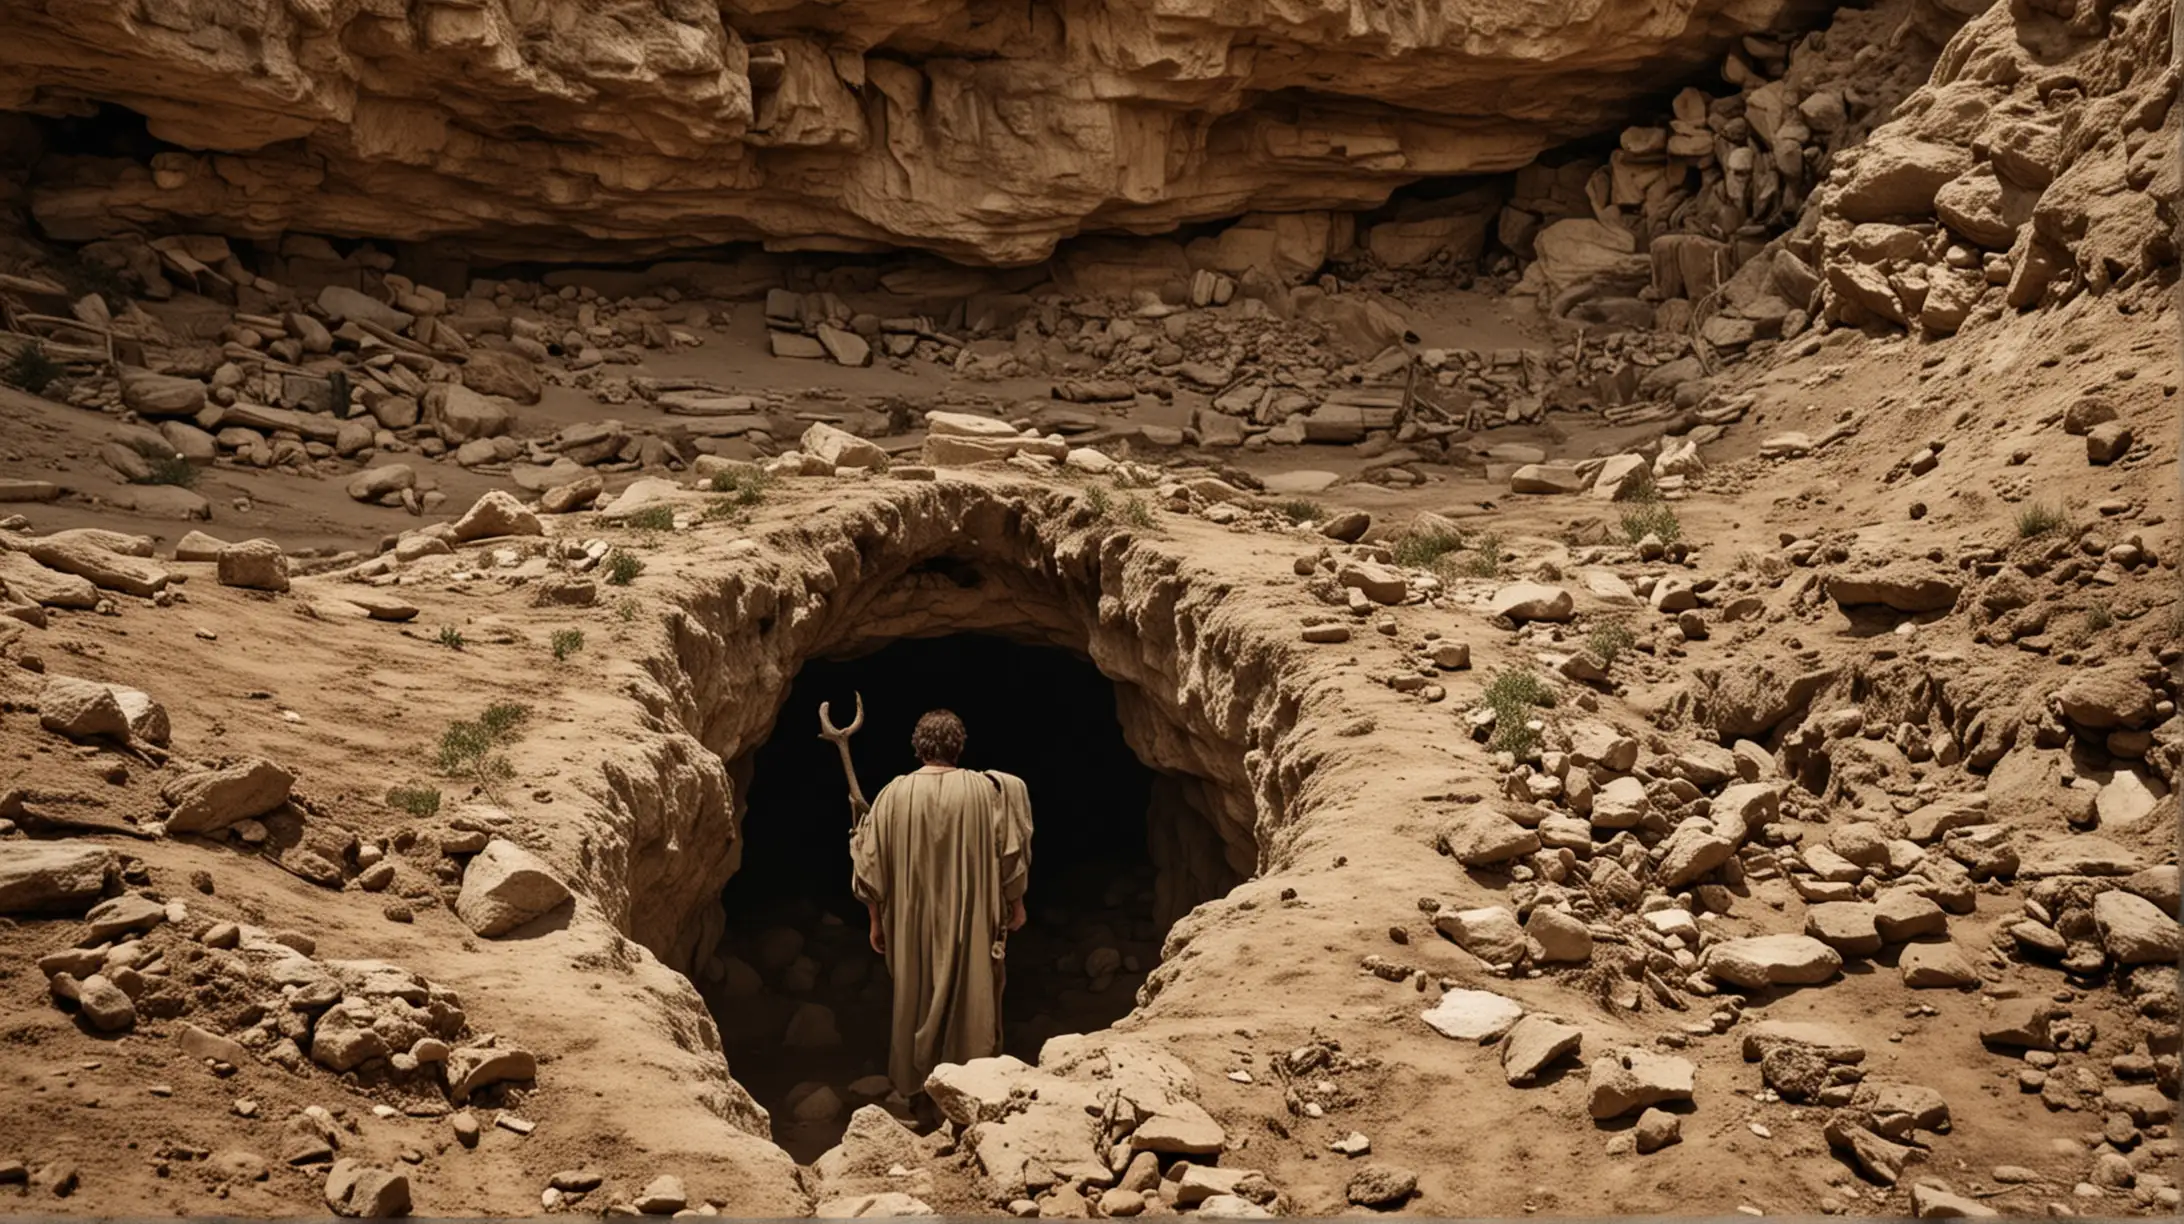 a man standing out of a dug grave. Set in a cave like area, during the era of the Biblical Elijah.